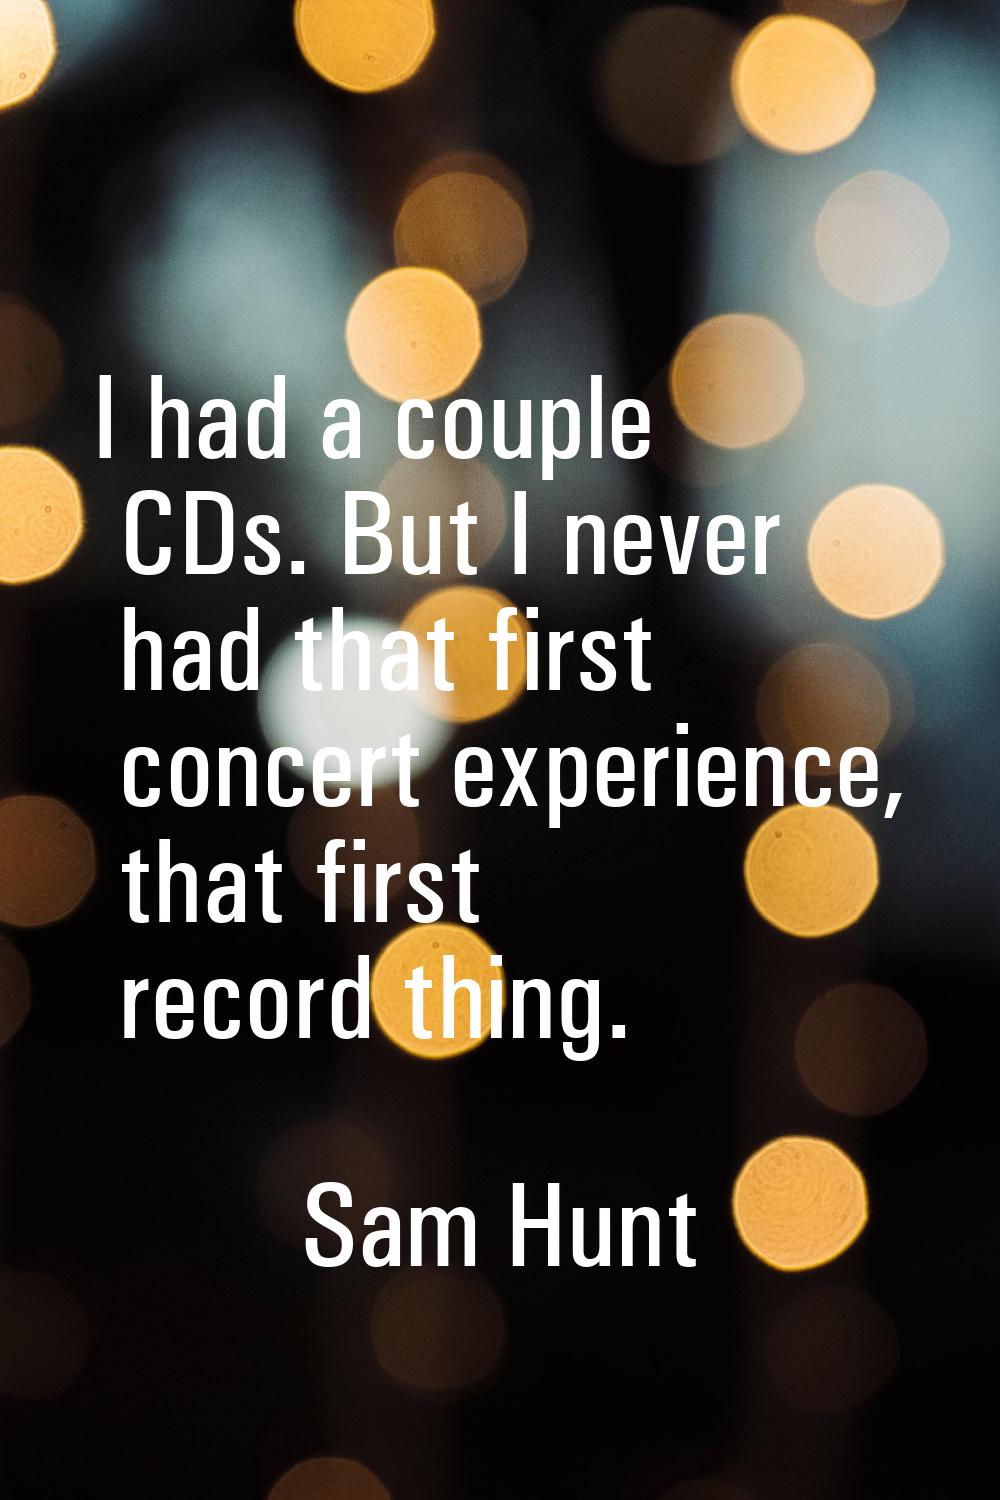 I had a couple CDs. But I never had that first concert experience, that first record thing.